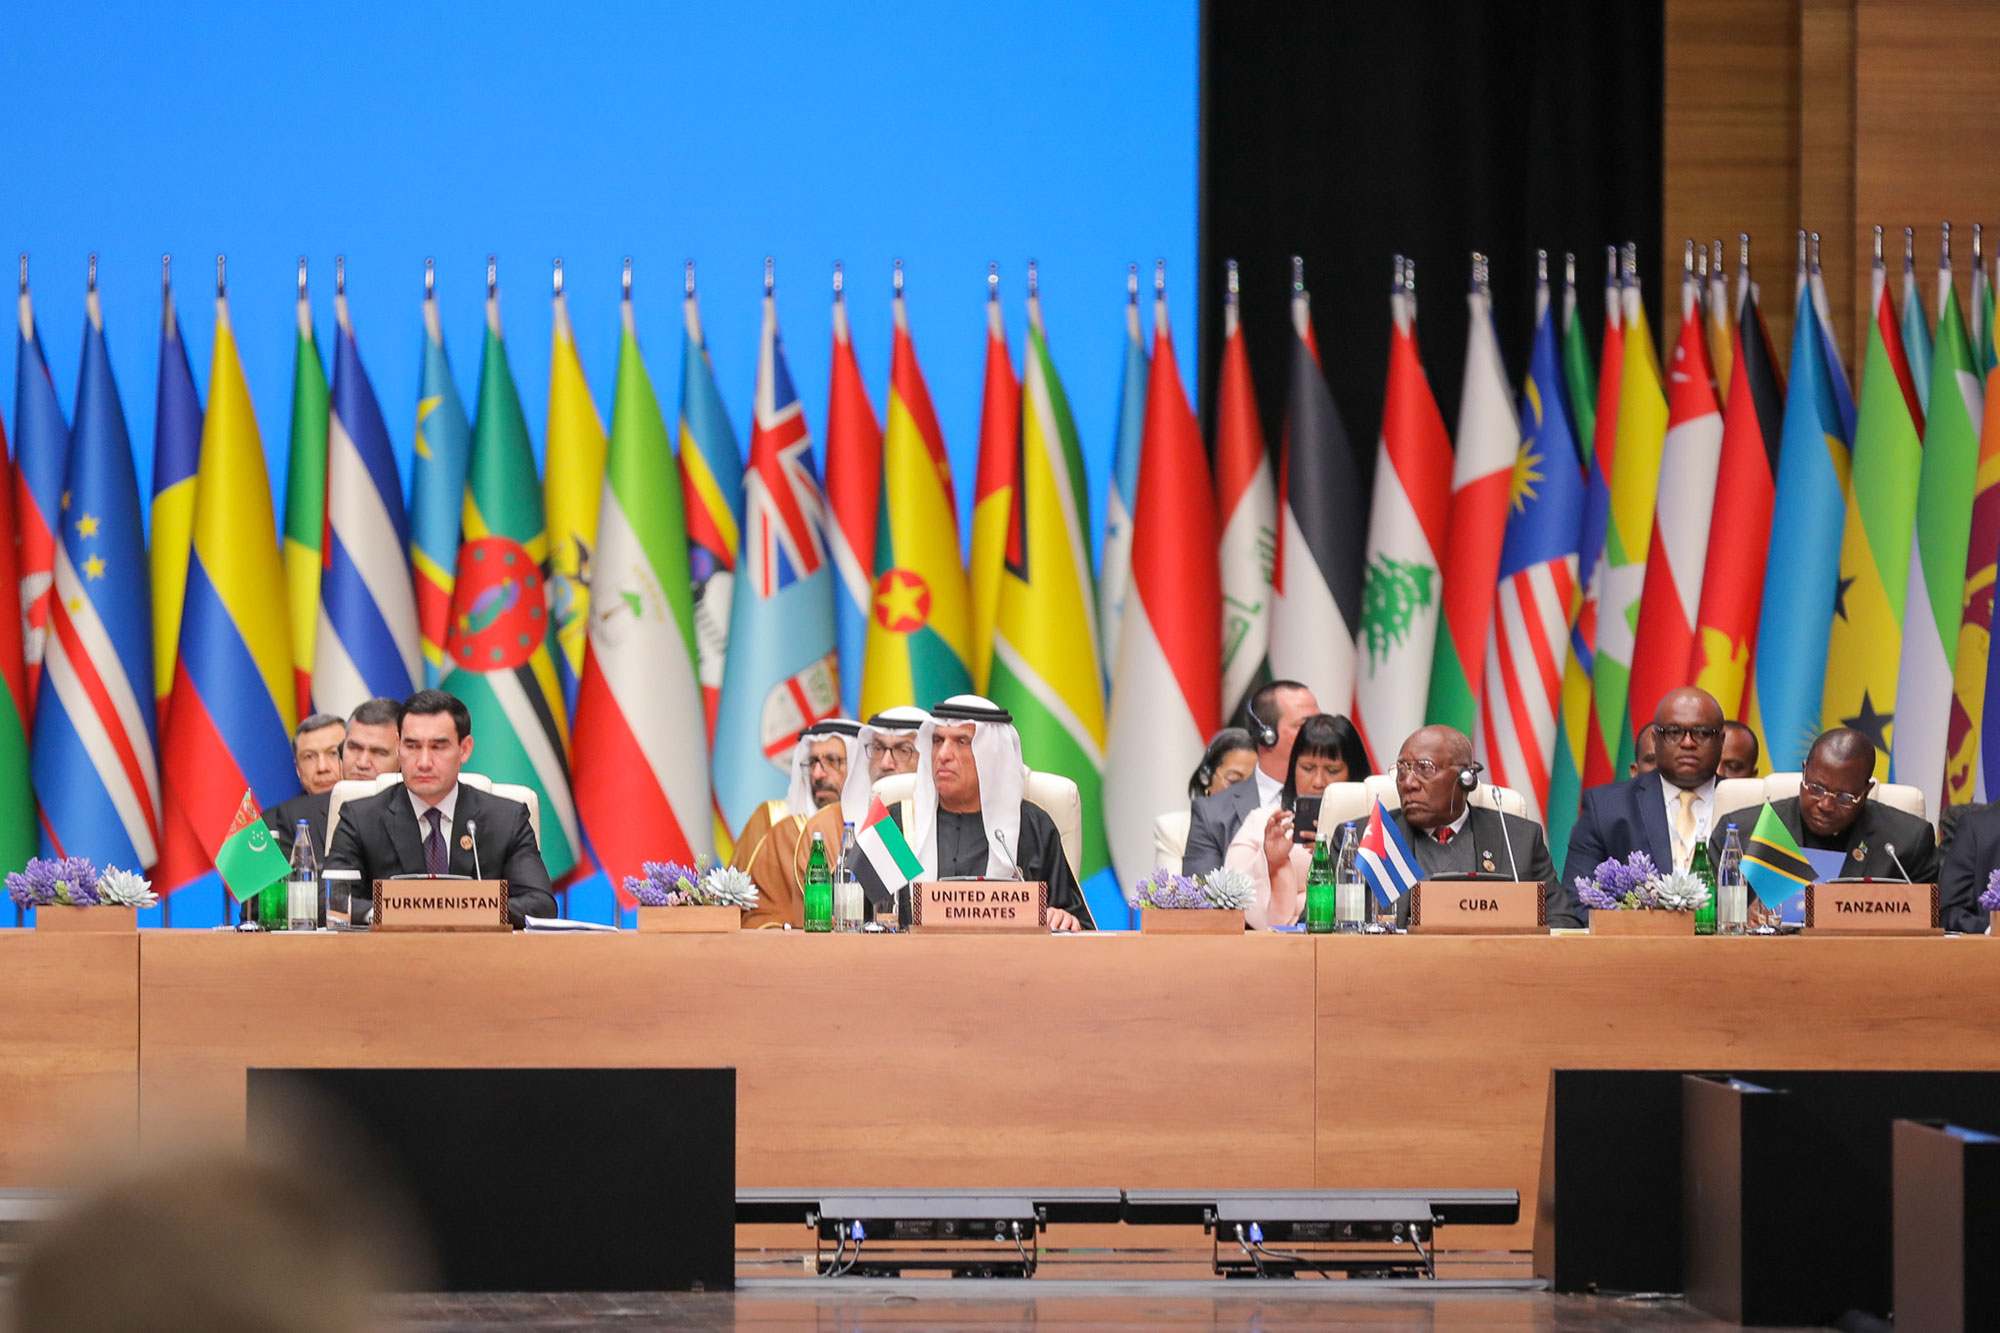 The Summit-level Meeting of the Non-Aligned Movement Contact Group in the Azerbaijani